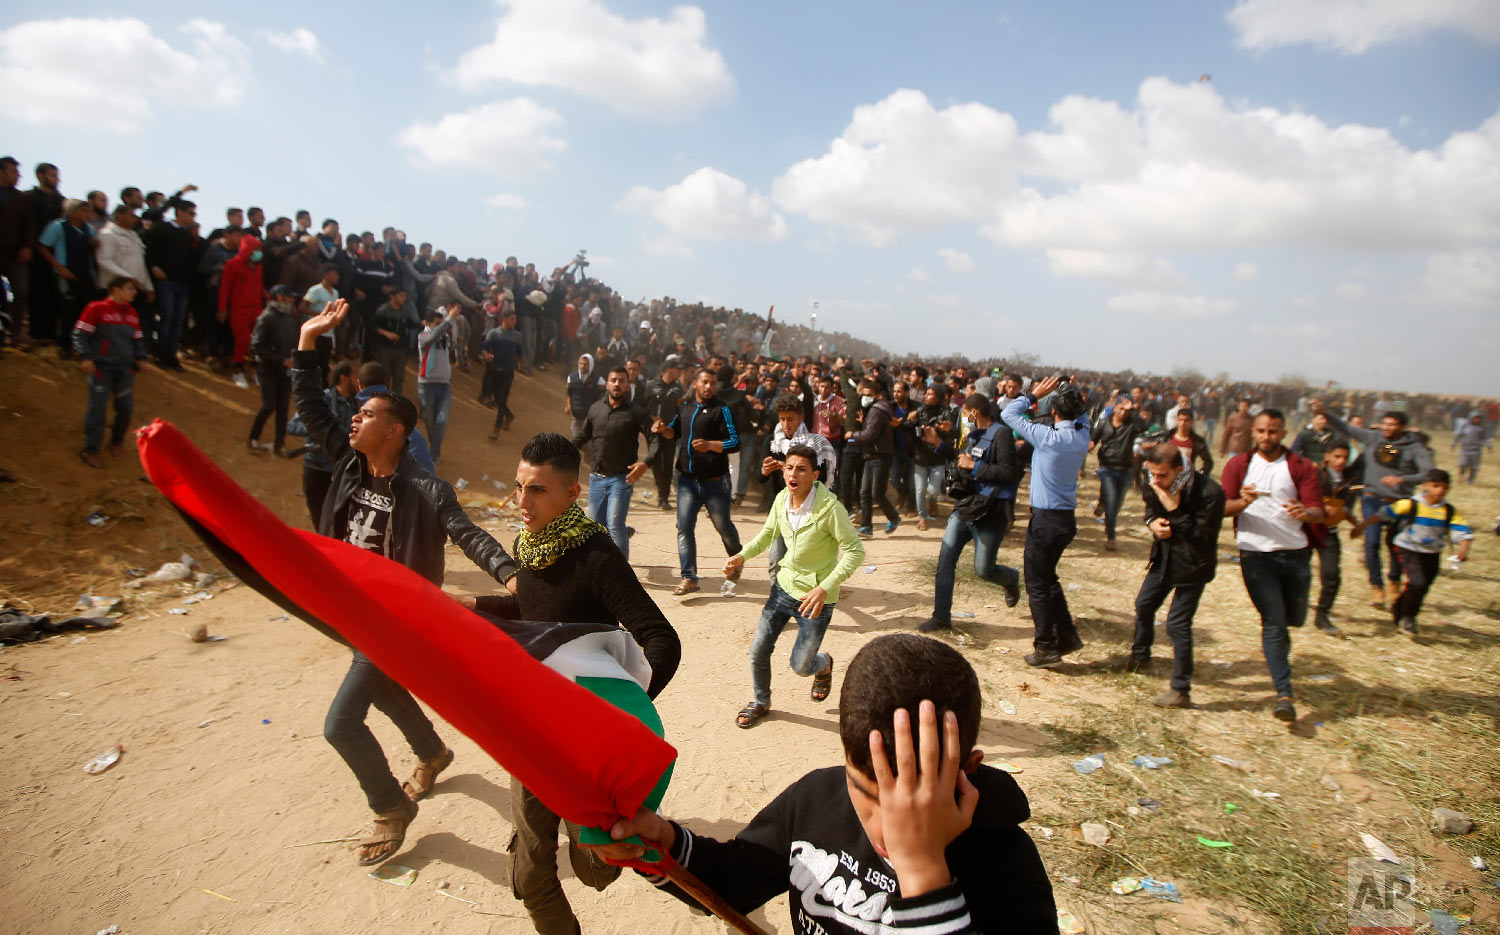  Palestinian protesters react while evacuate a wounded youth during clashes with Israeli troops along the Gaza Strip border with Israel, east of Khan Younis, Gaza Strip, Friday, March 30, 2018. (AP Photo/Adel Hana) 